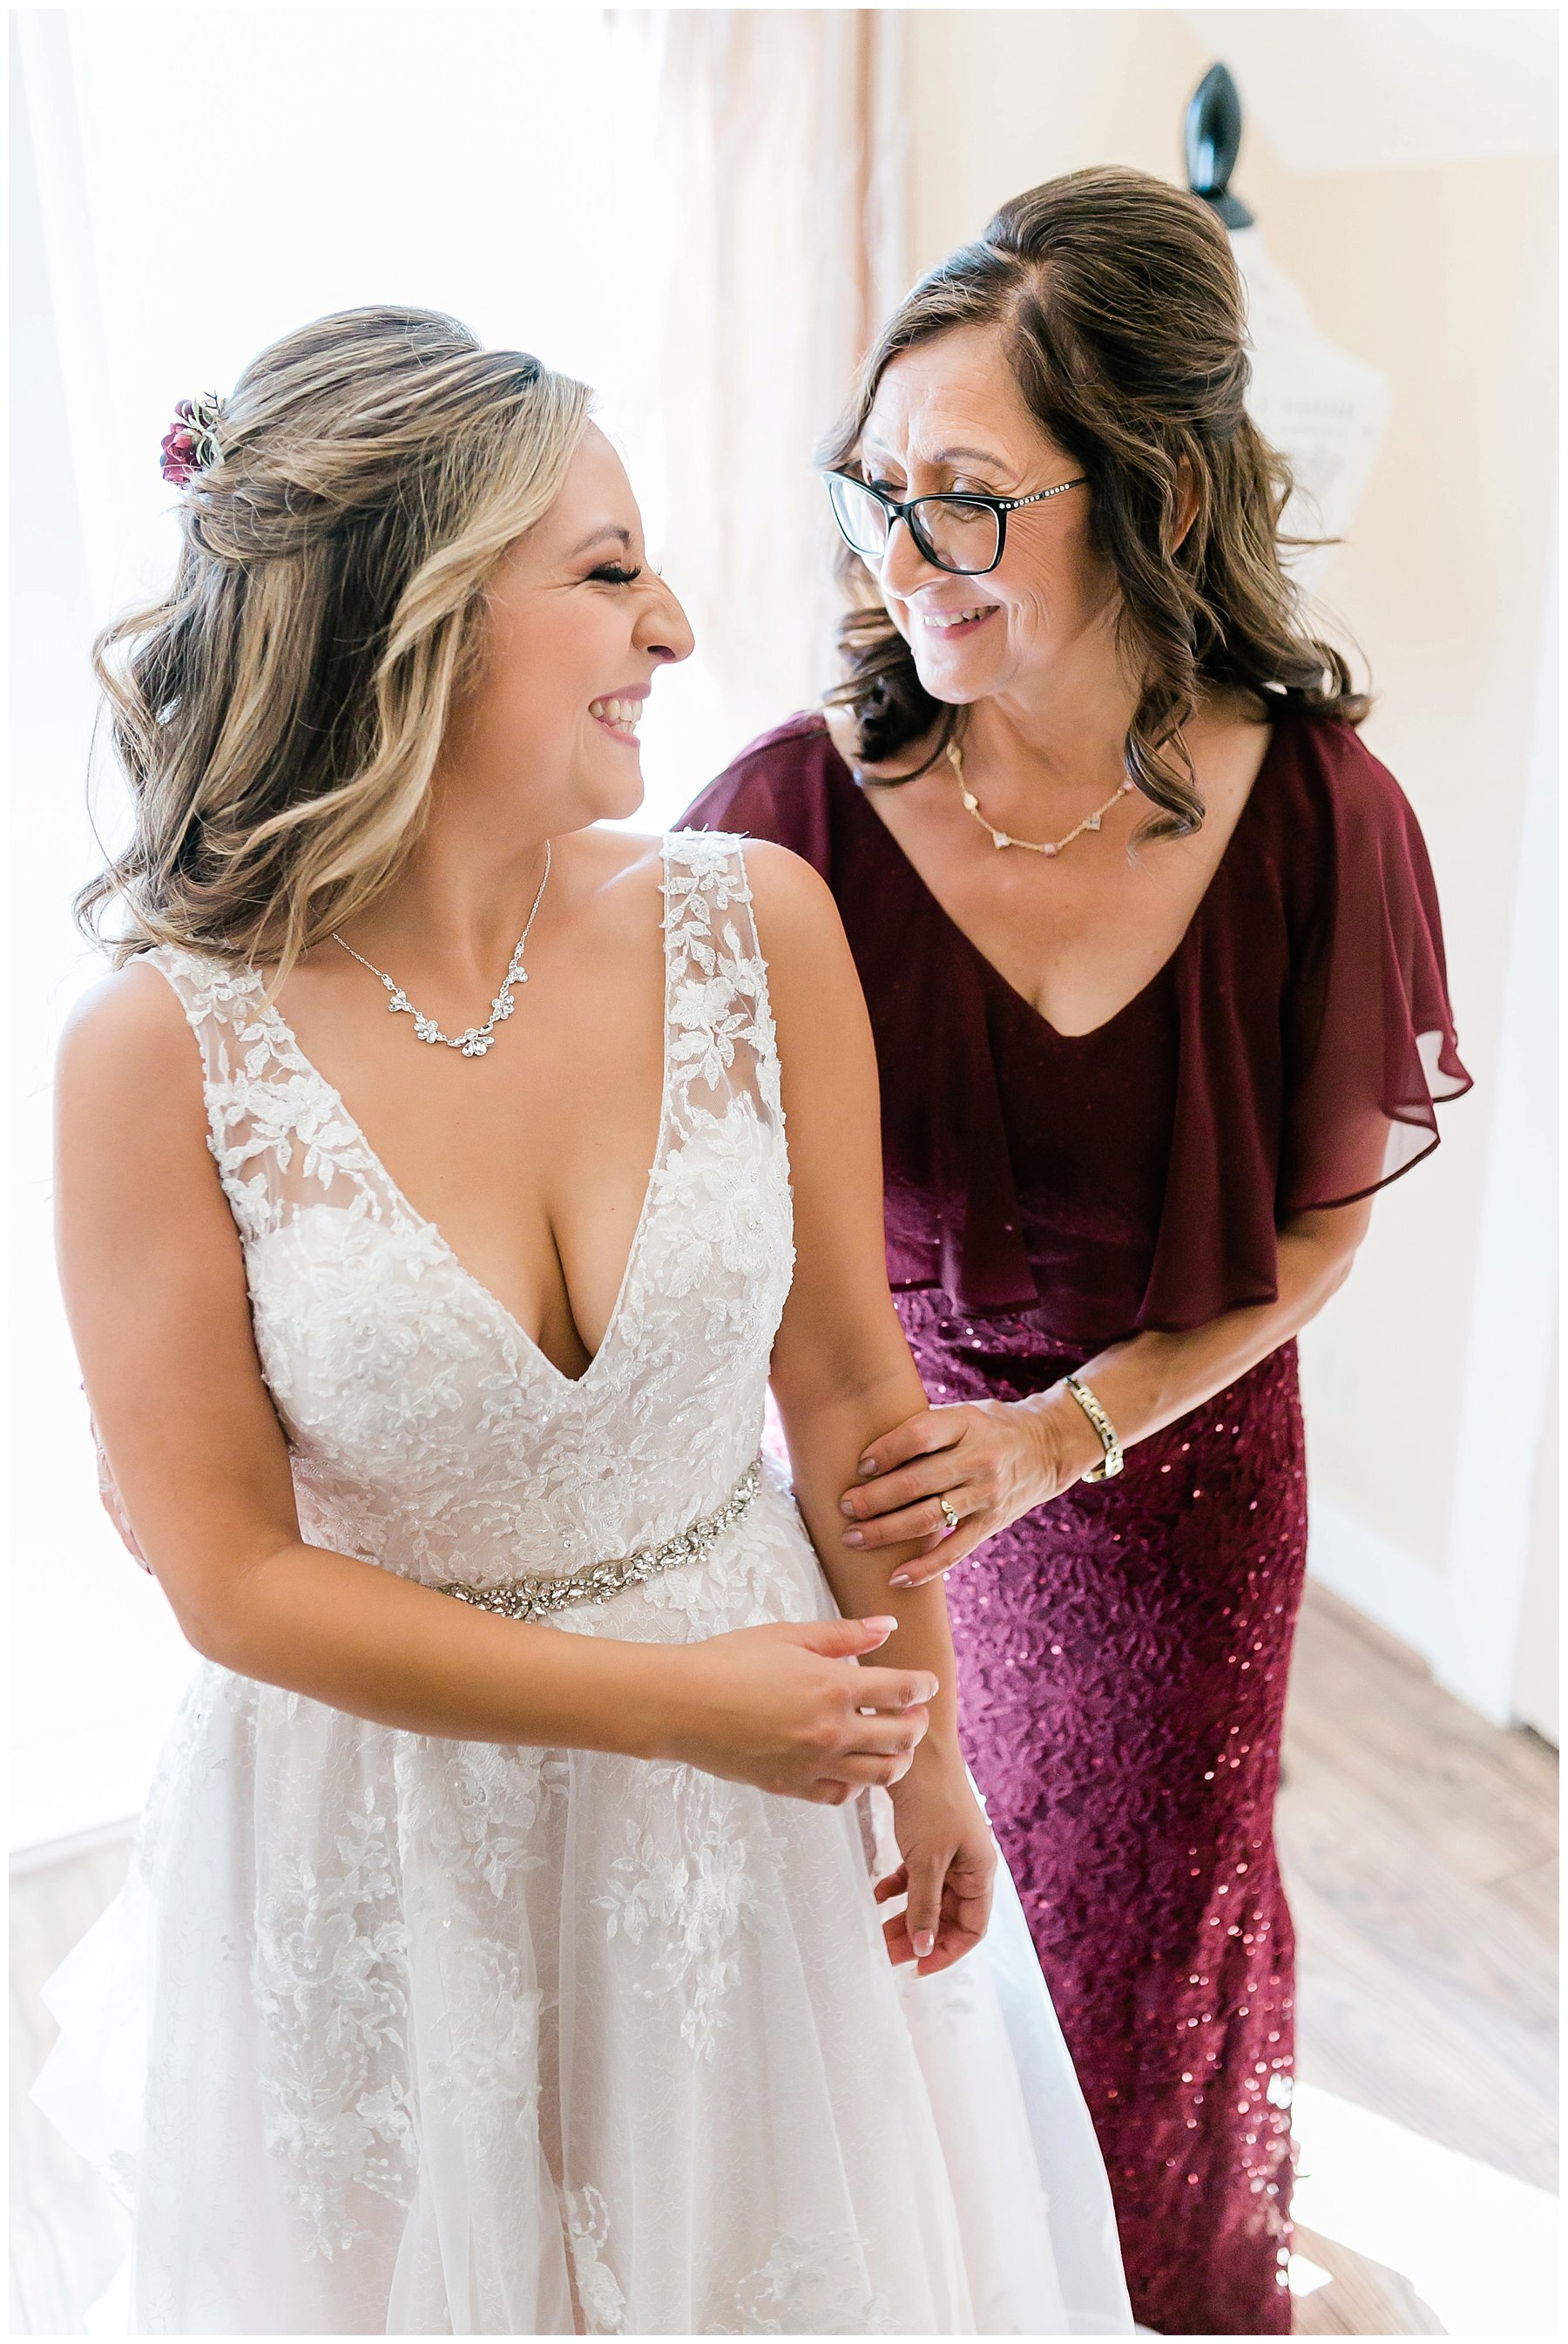  bride and her mother smiling and laughing 